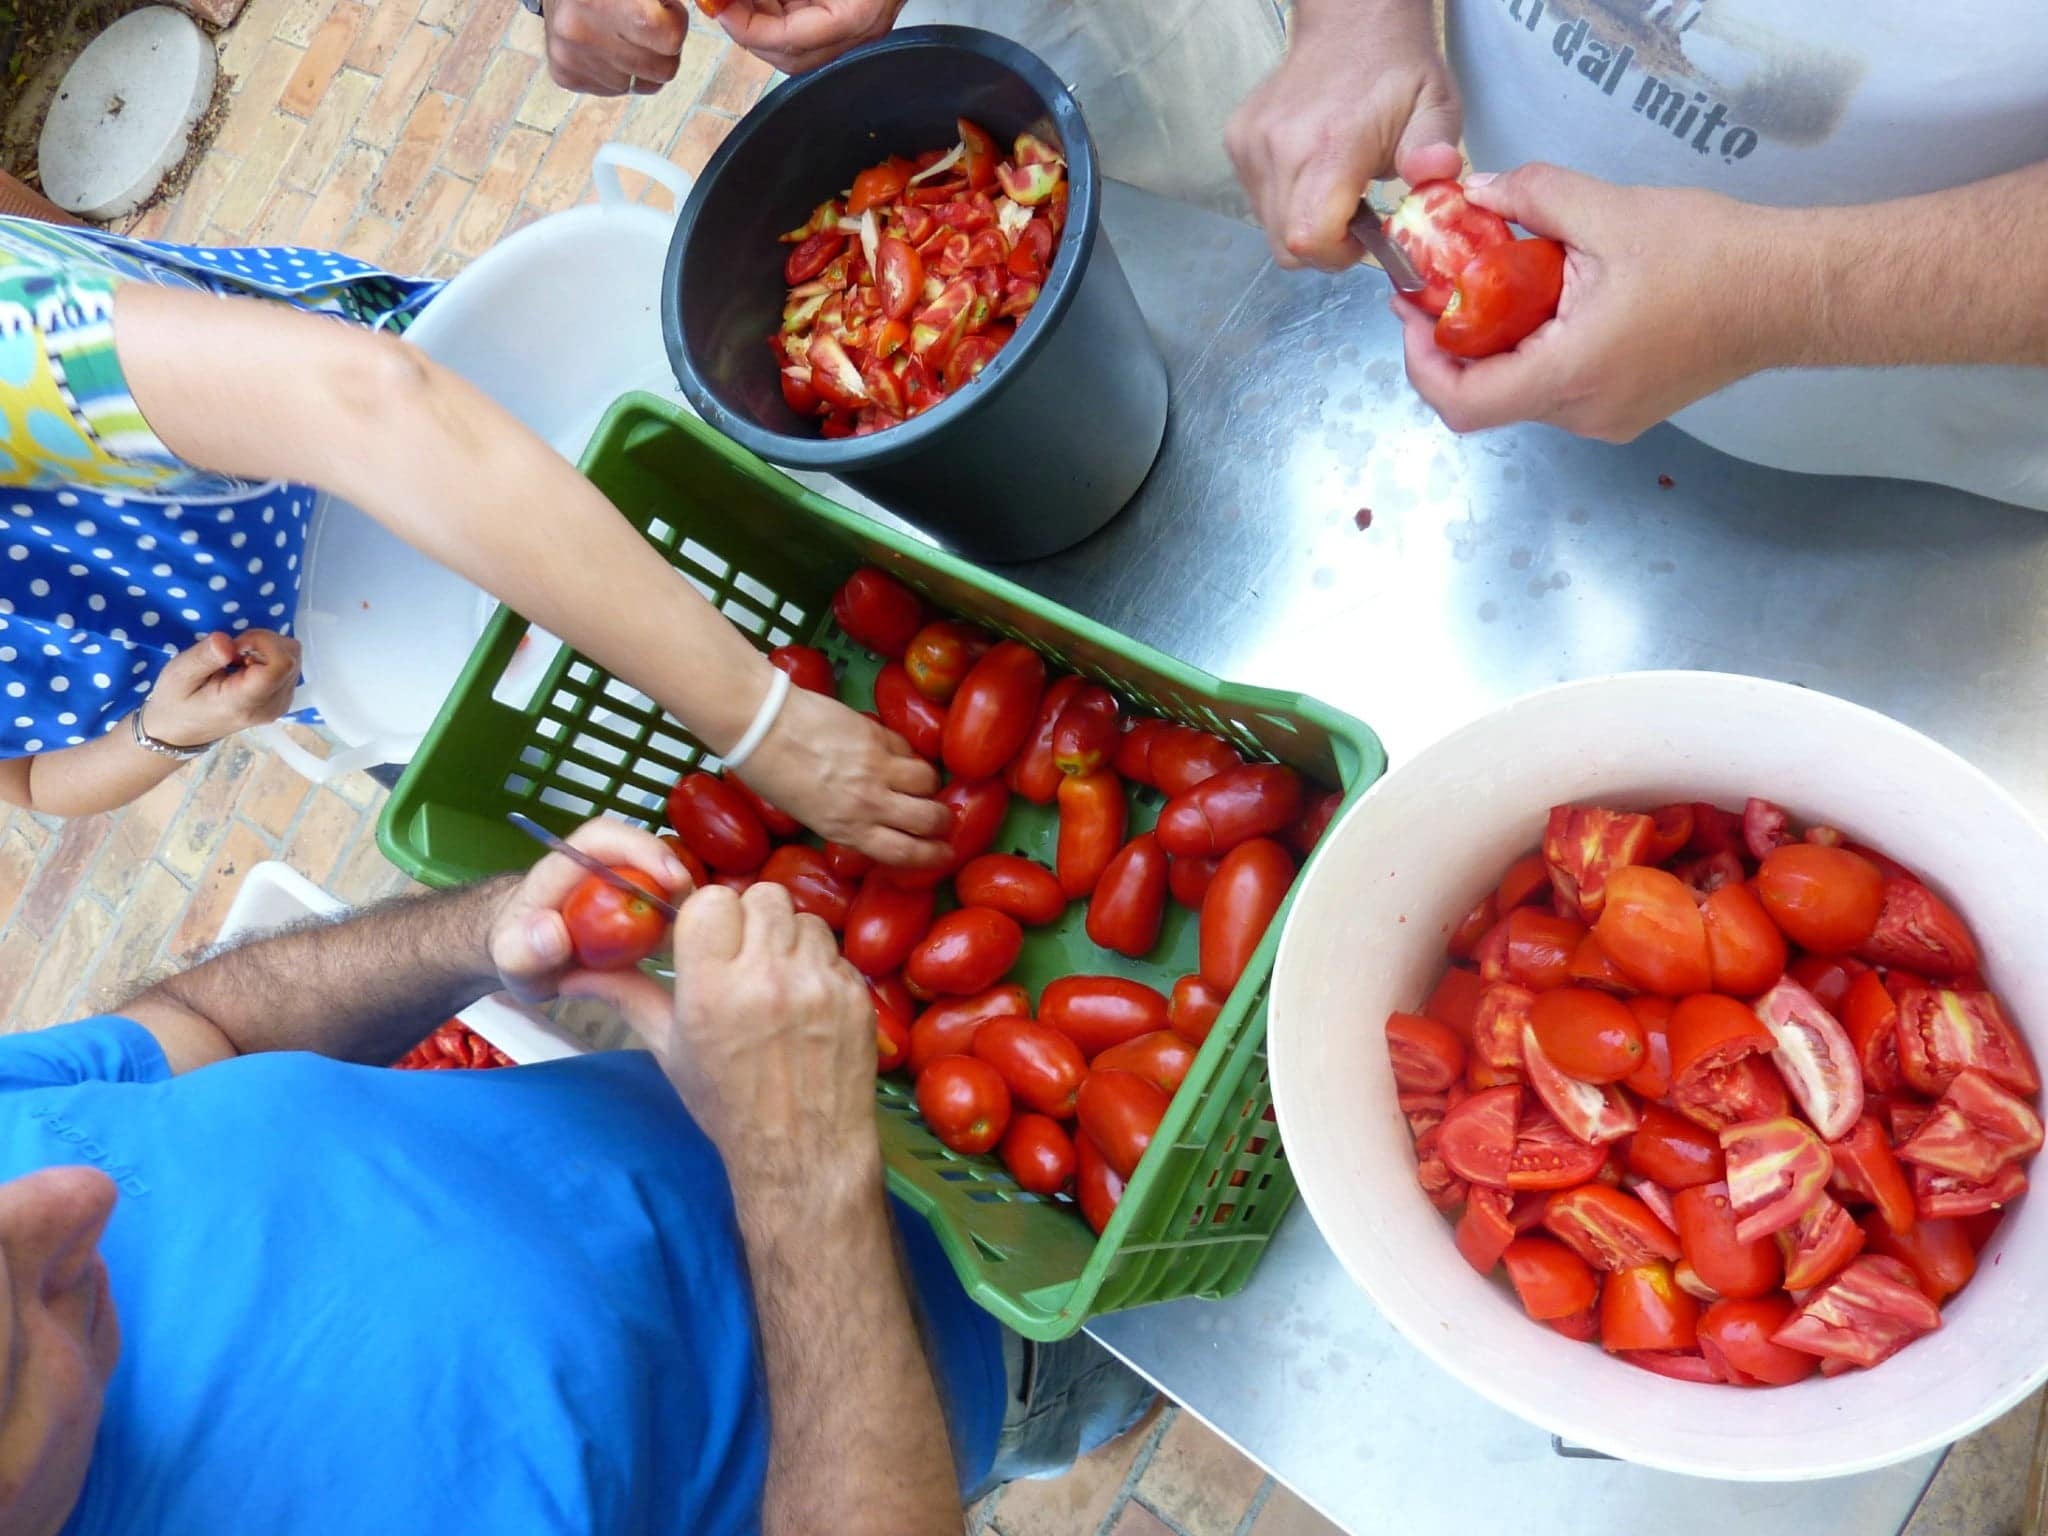 The team cleaning tomatoes